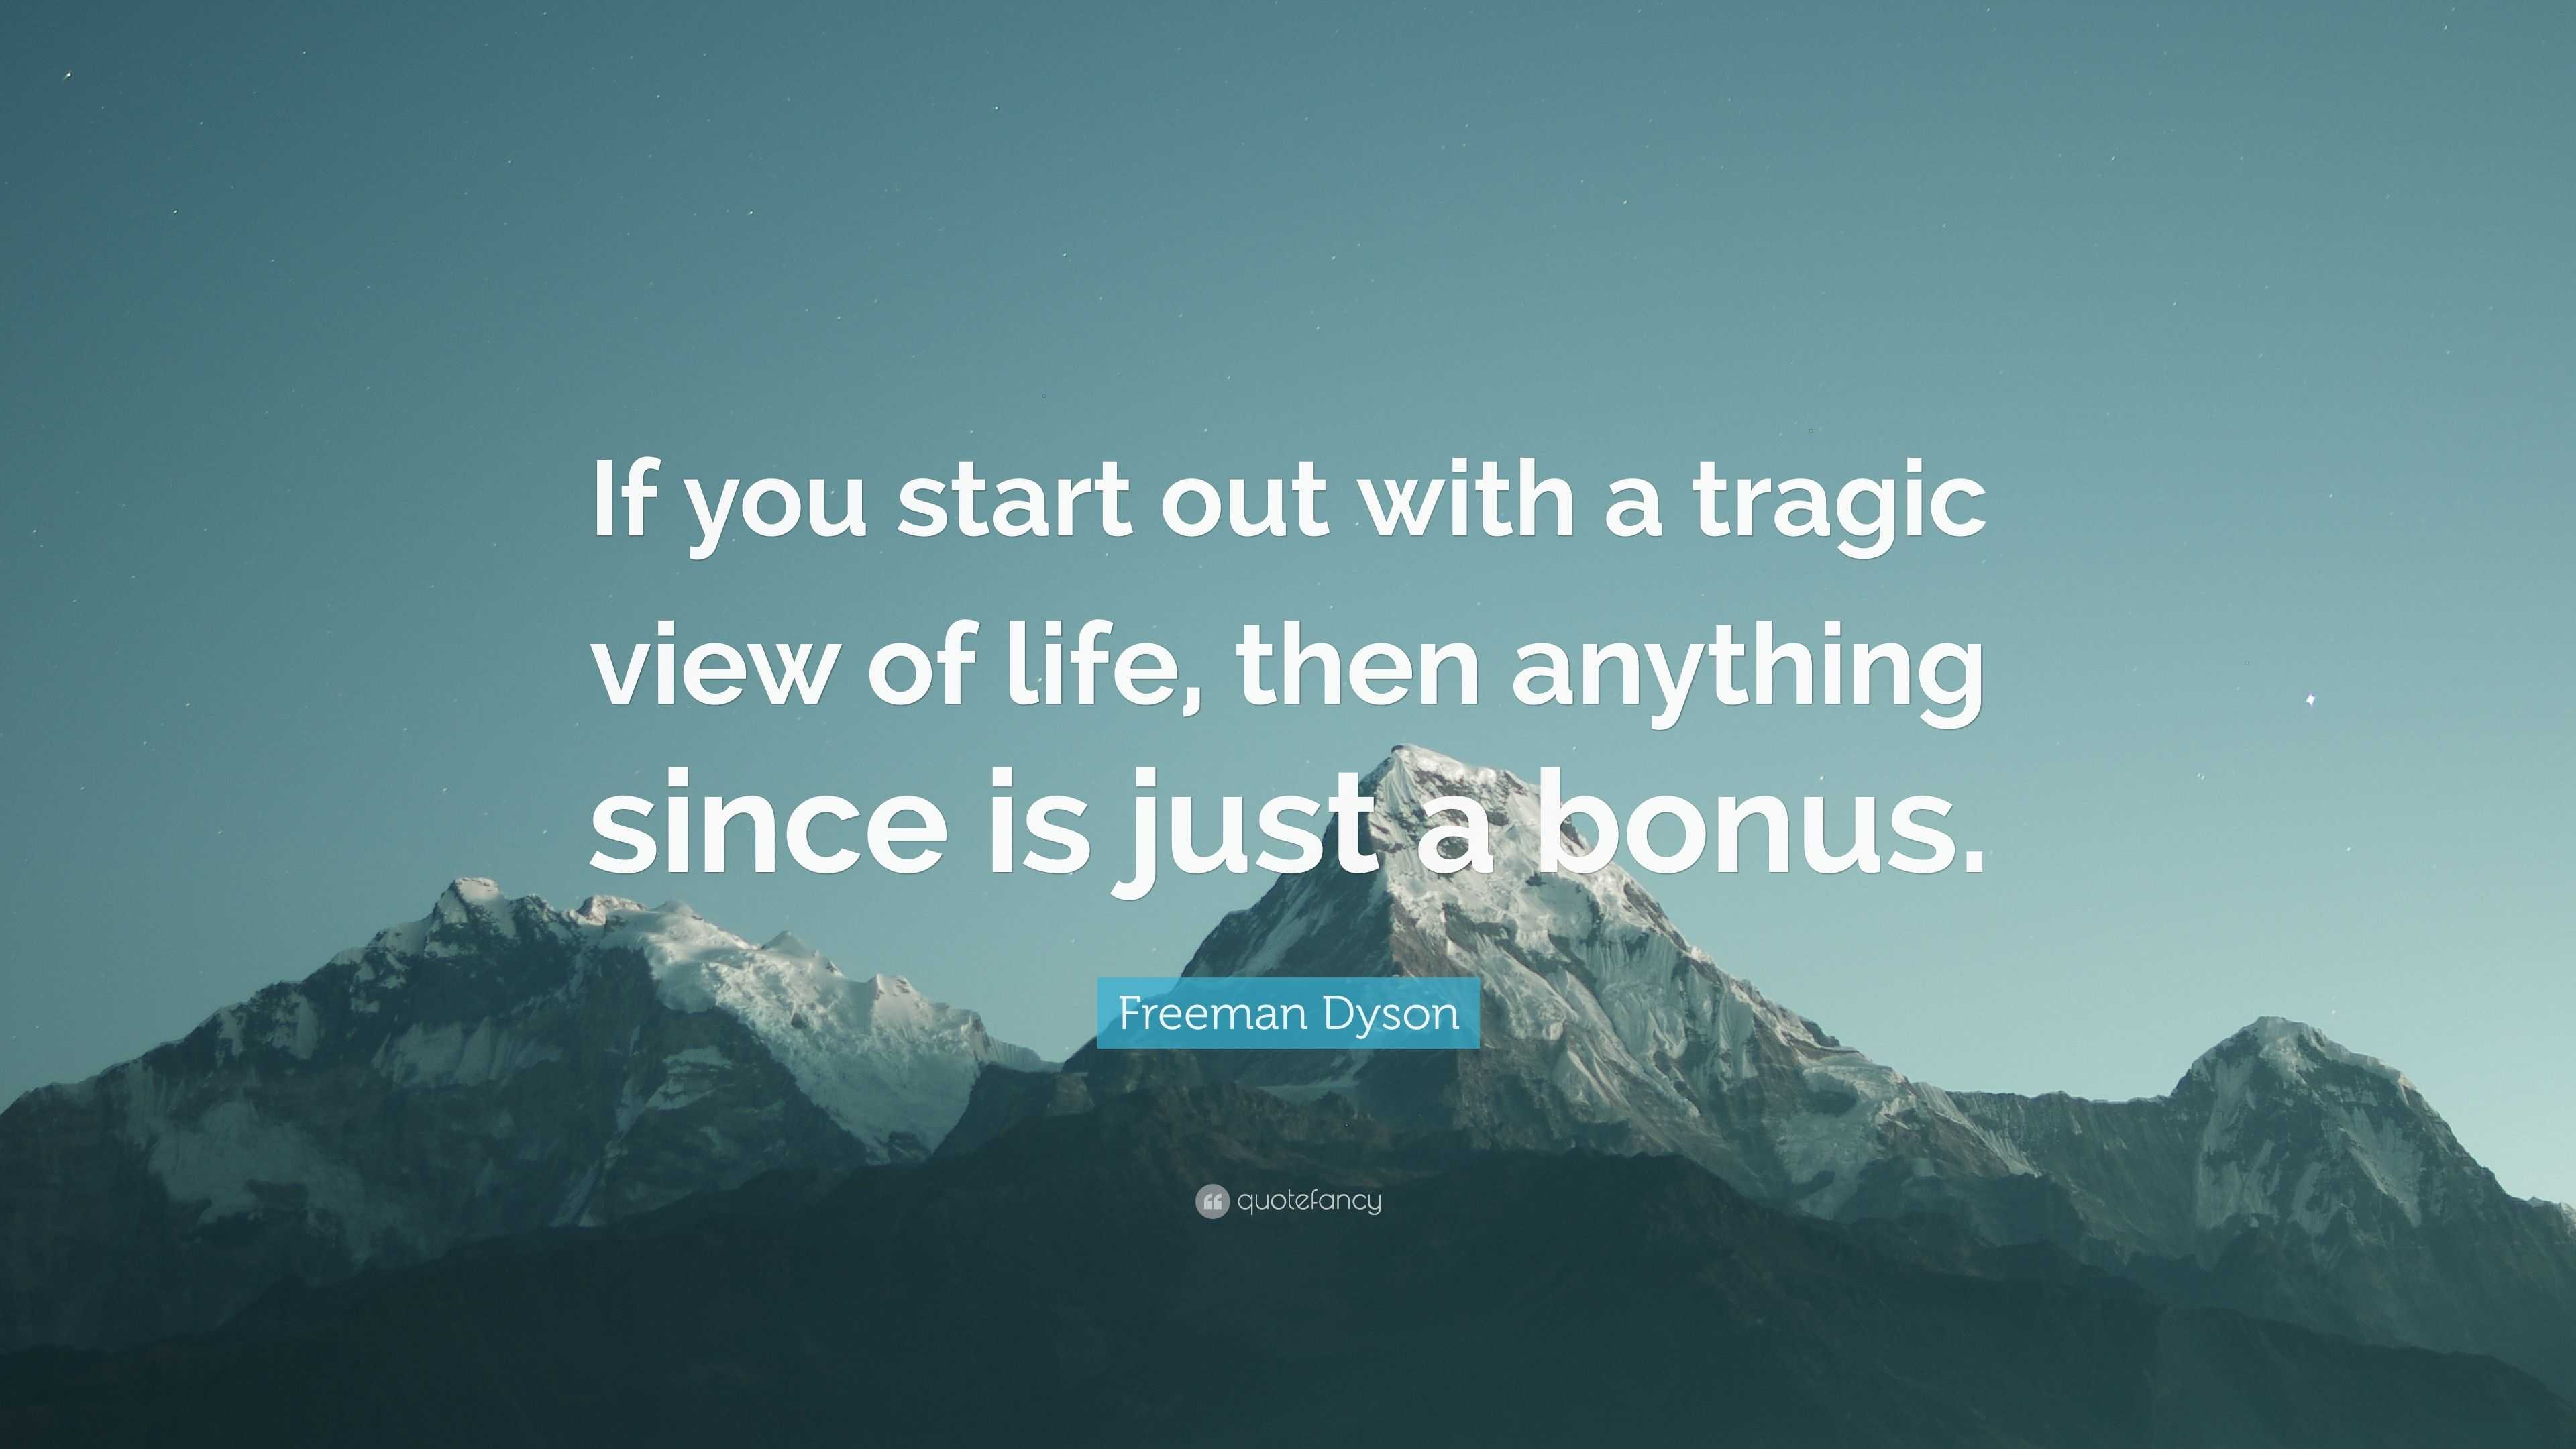 Freeman Dyson Quote: “If you start out with a tragic view of life, then